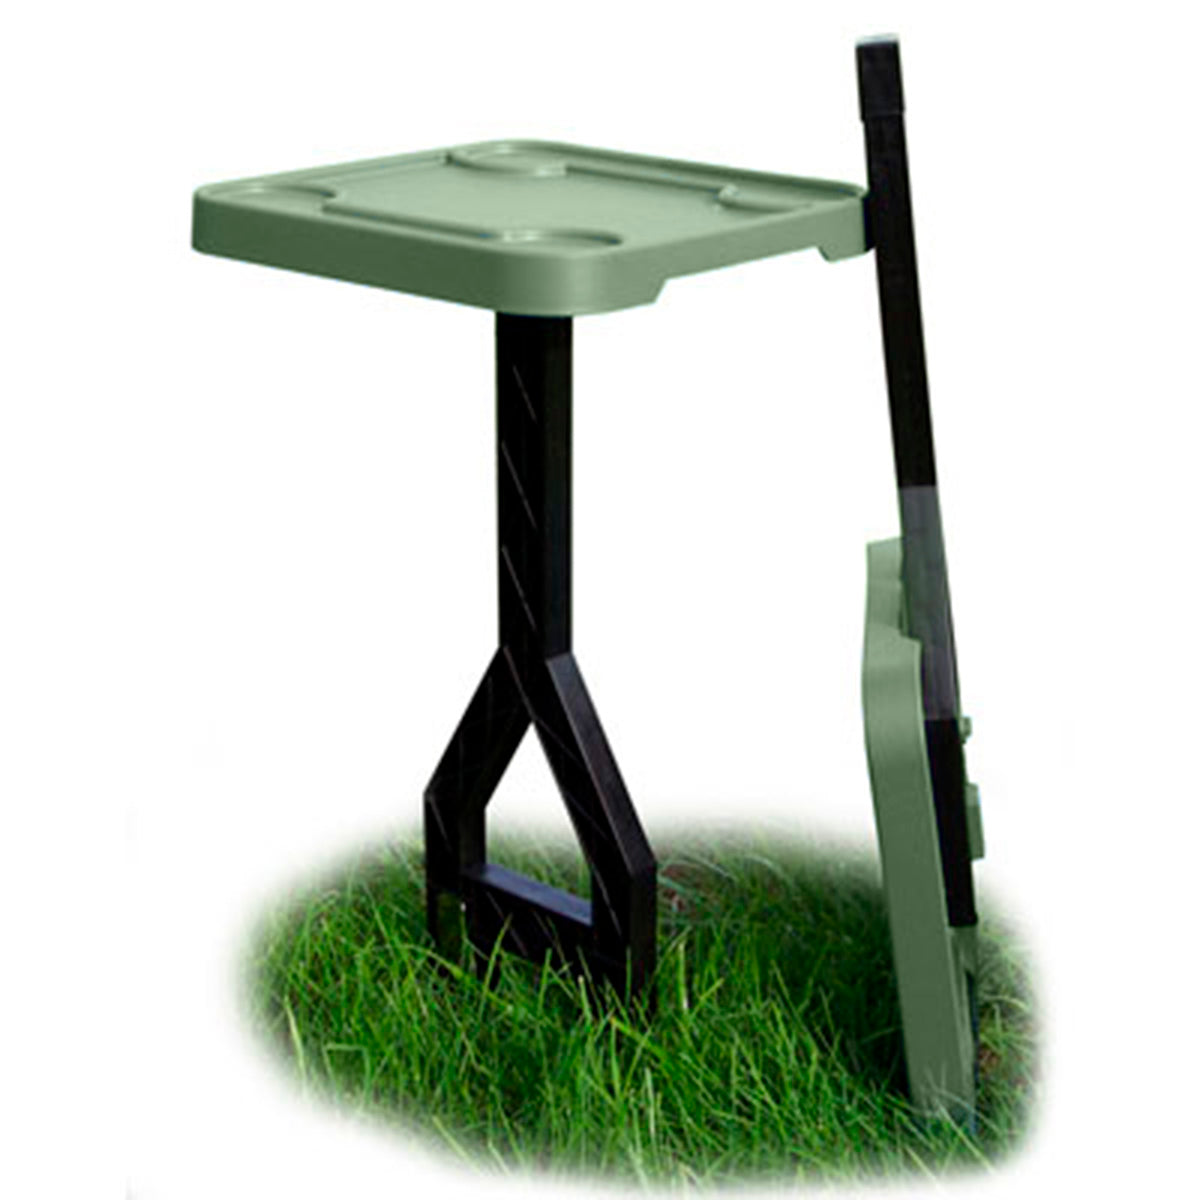 JM-1-11 - Jammit Personal Outdoor Table for Cookouts Barbeques Sports